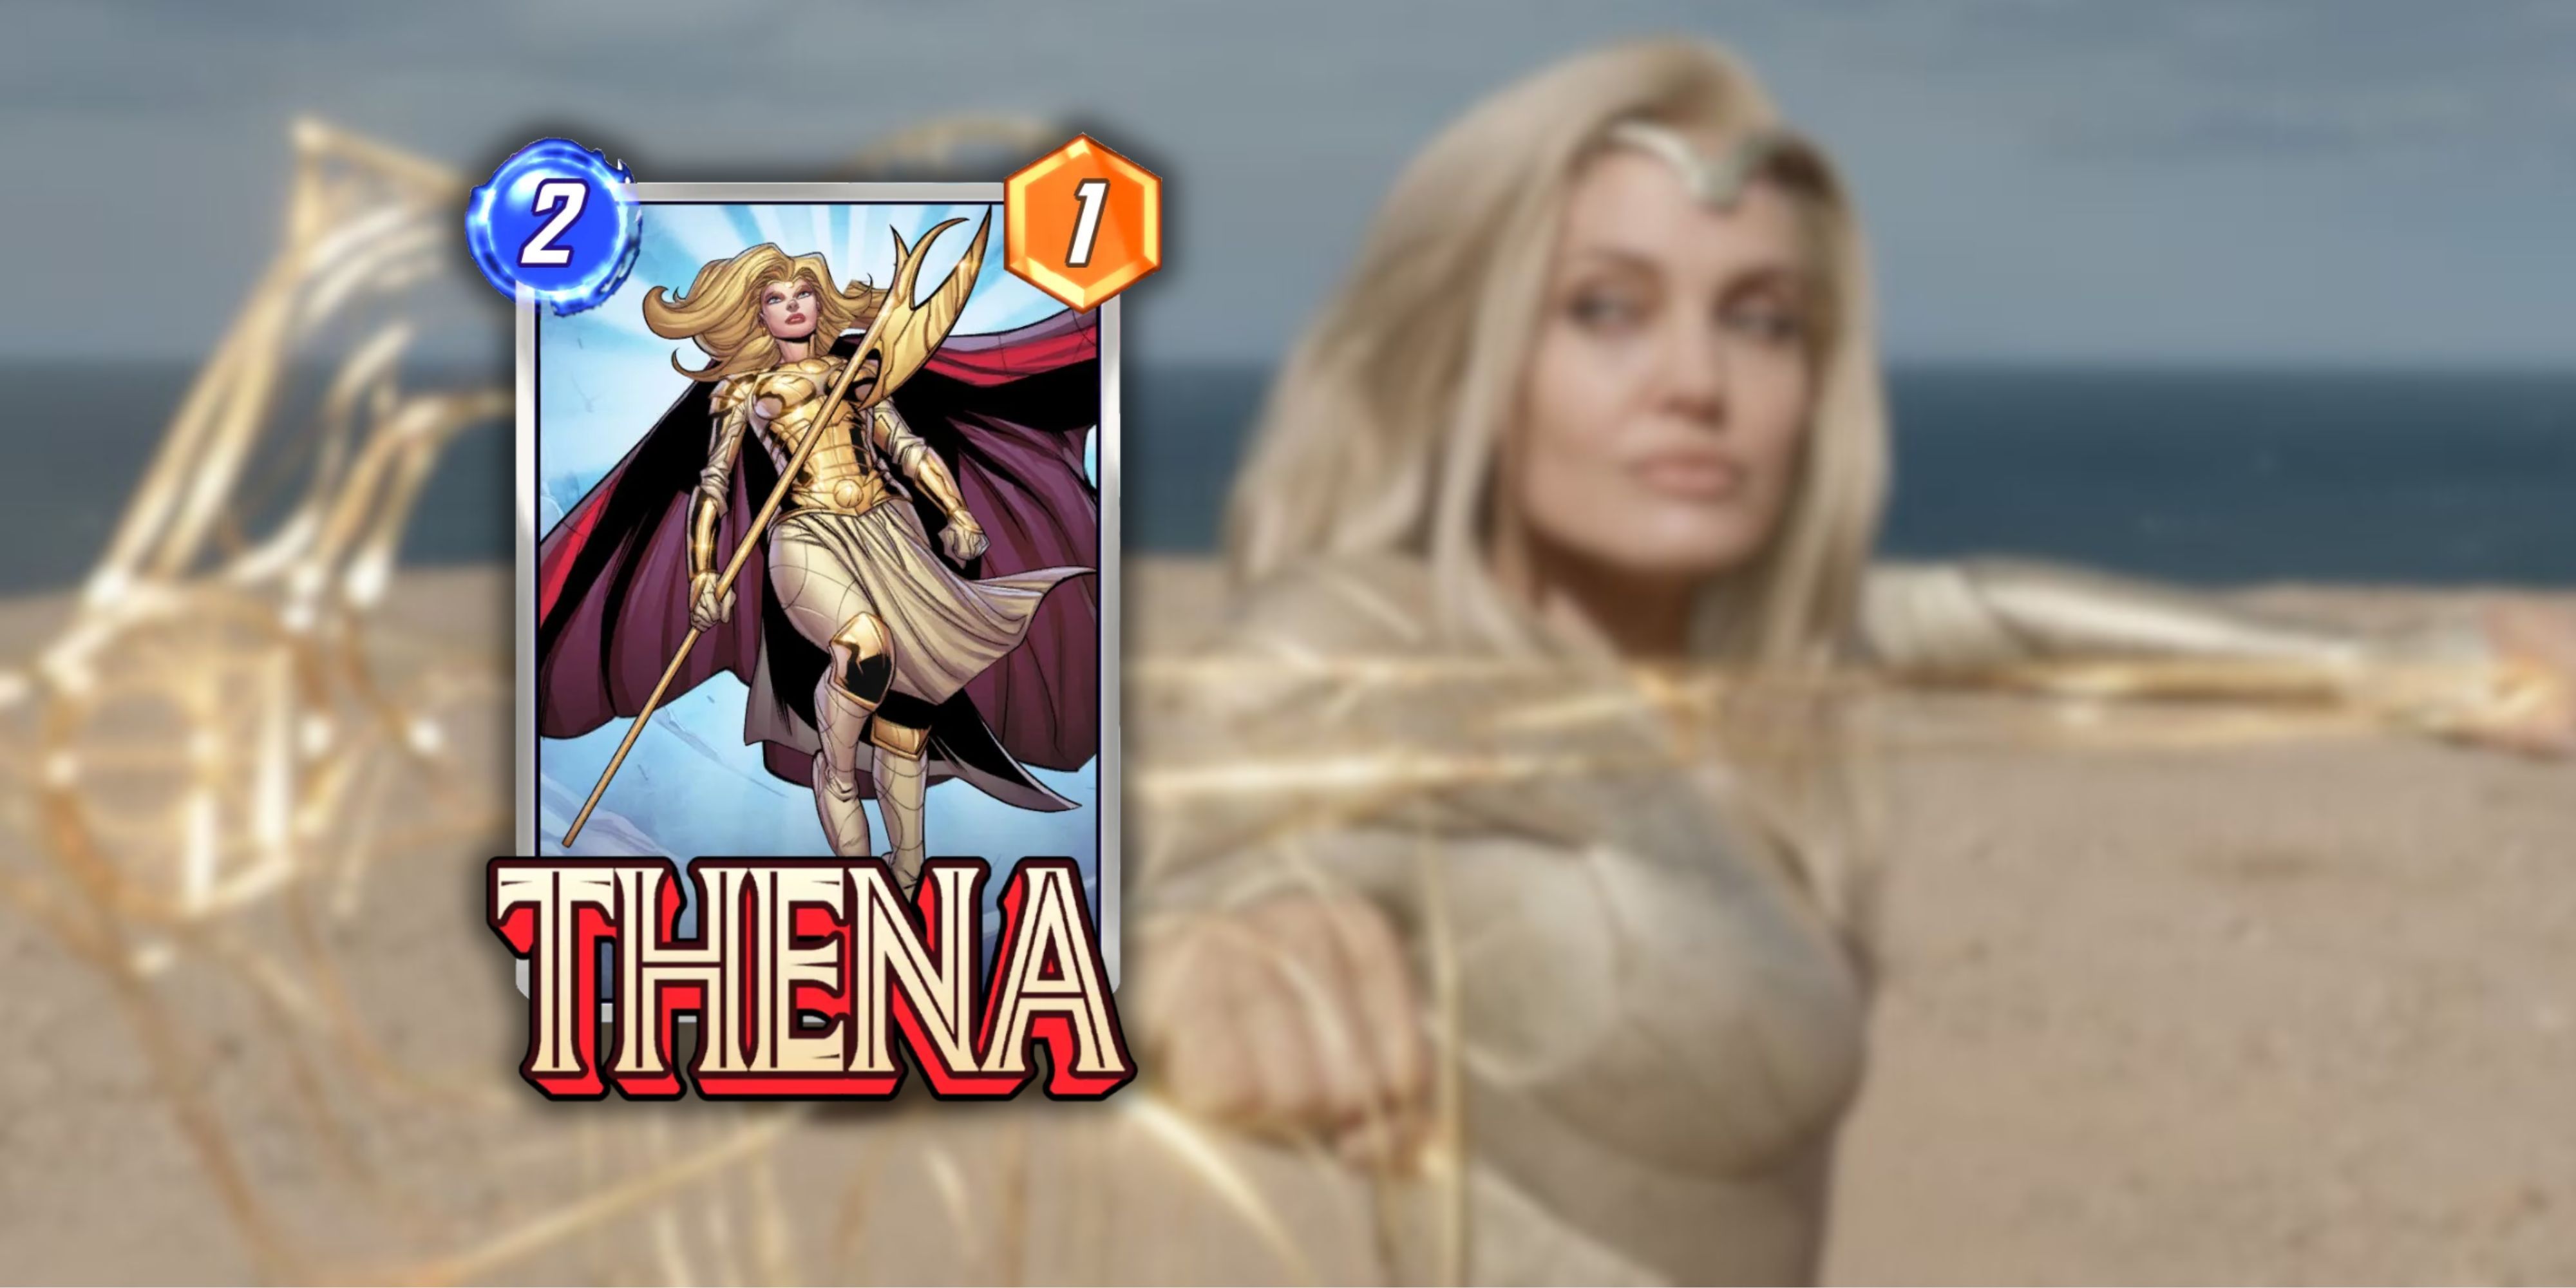 thena card in marvel snap.